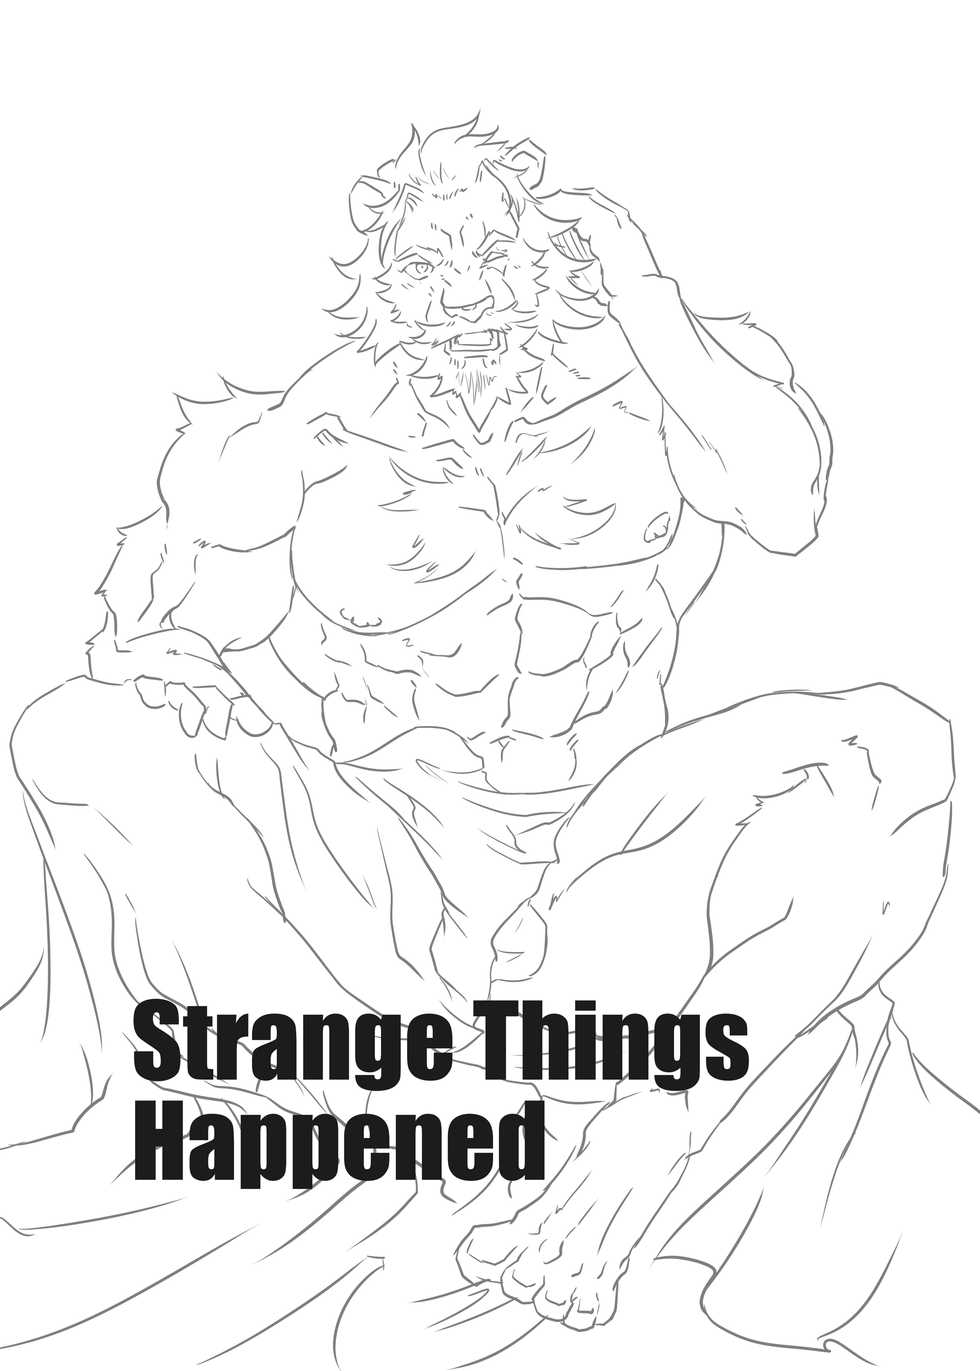 [Lander] Strange Things Happened (Overwatch) [Chinese] - Page 3